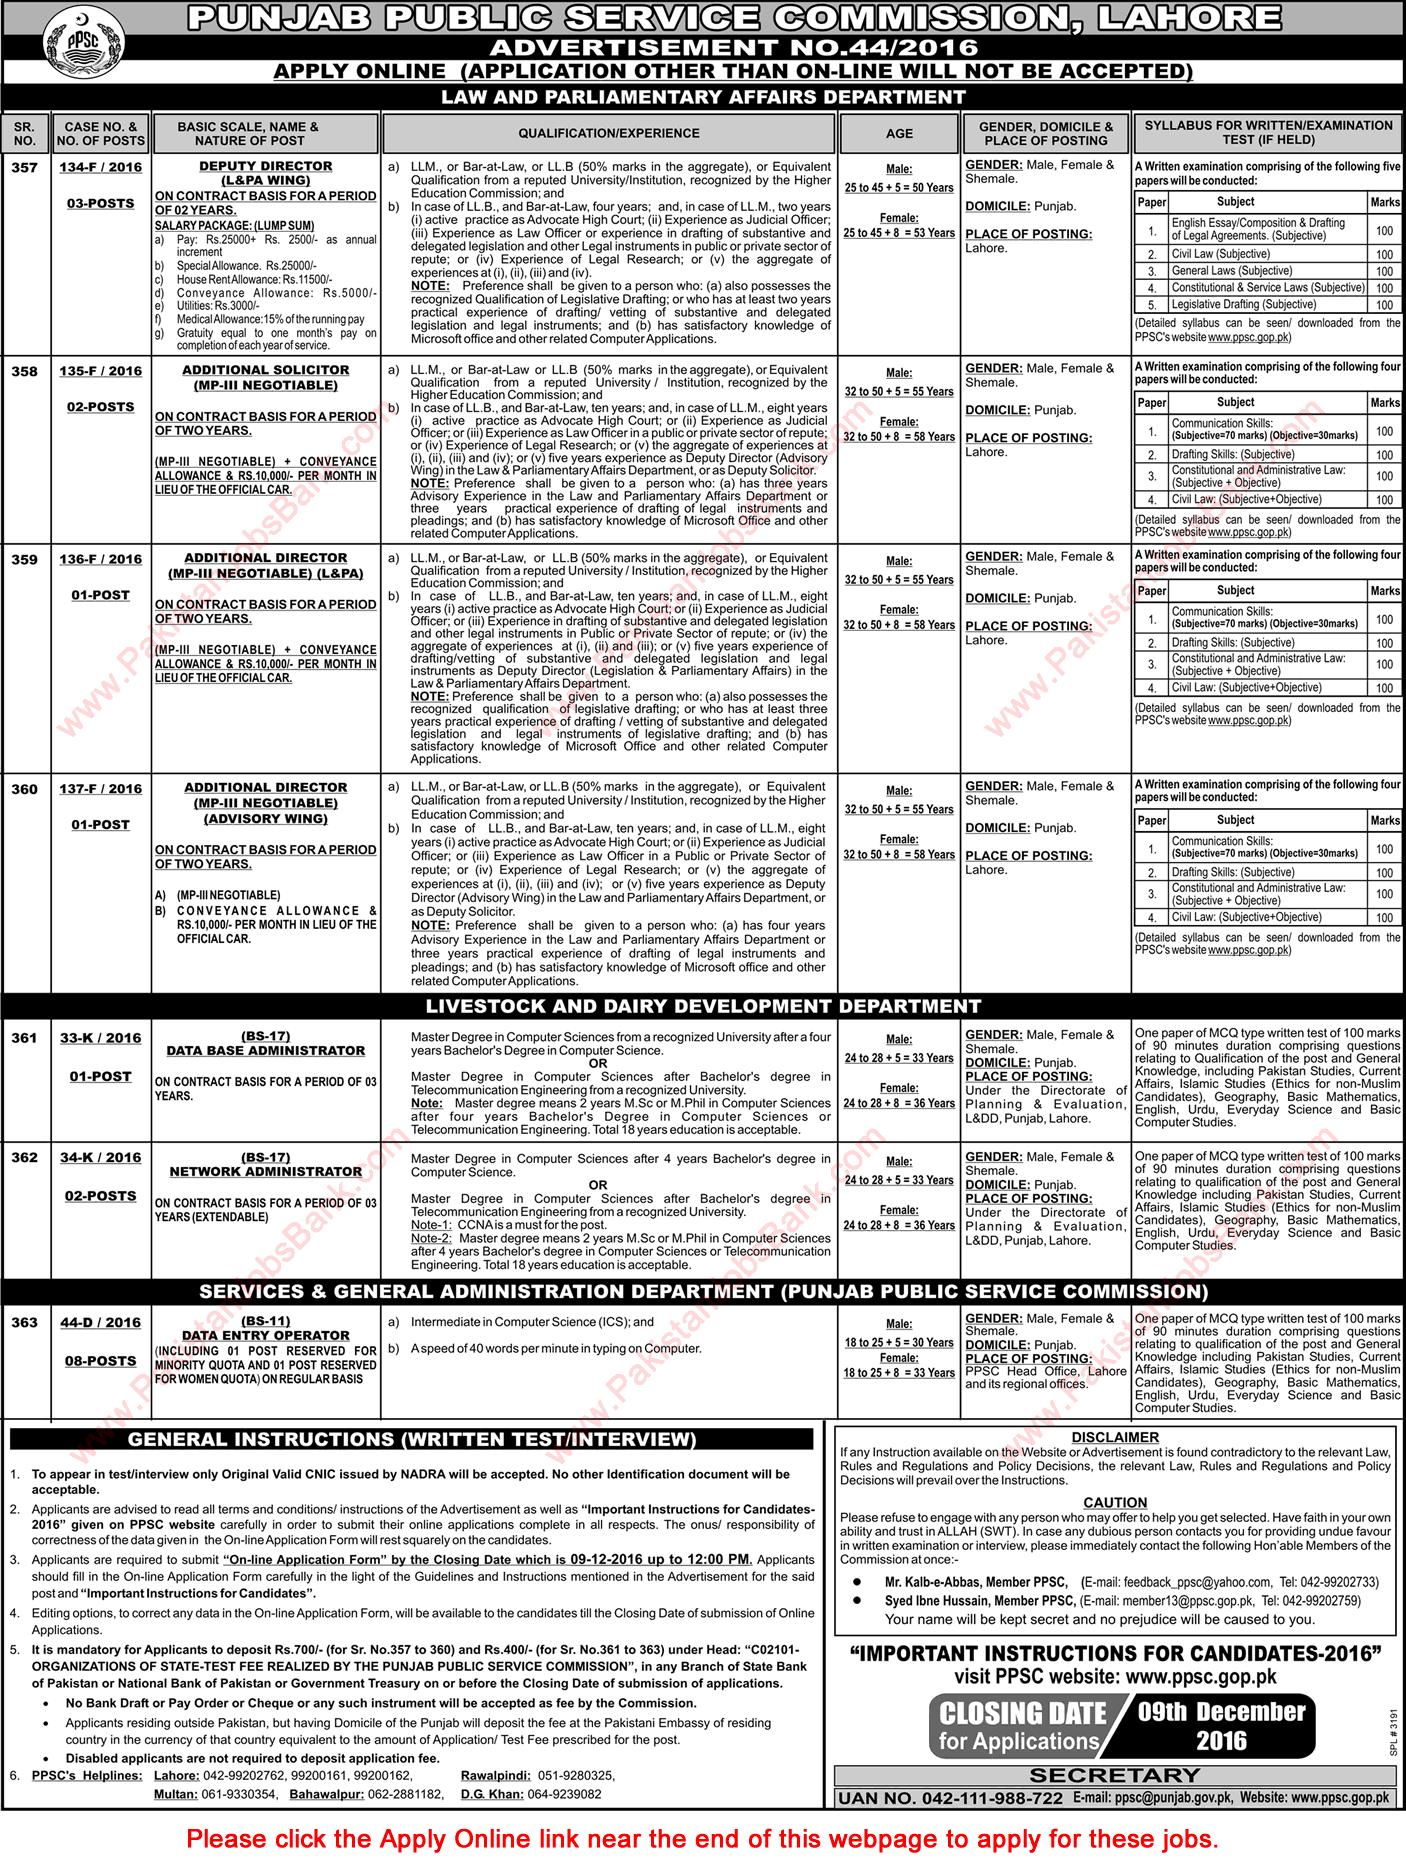 PPSC Jobs November 2016 Consolidated Advertisement No 44/2016 Apply Online Latest